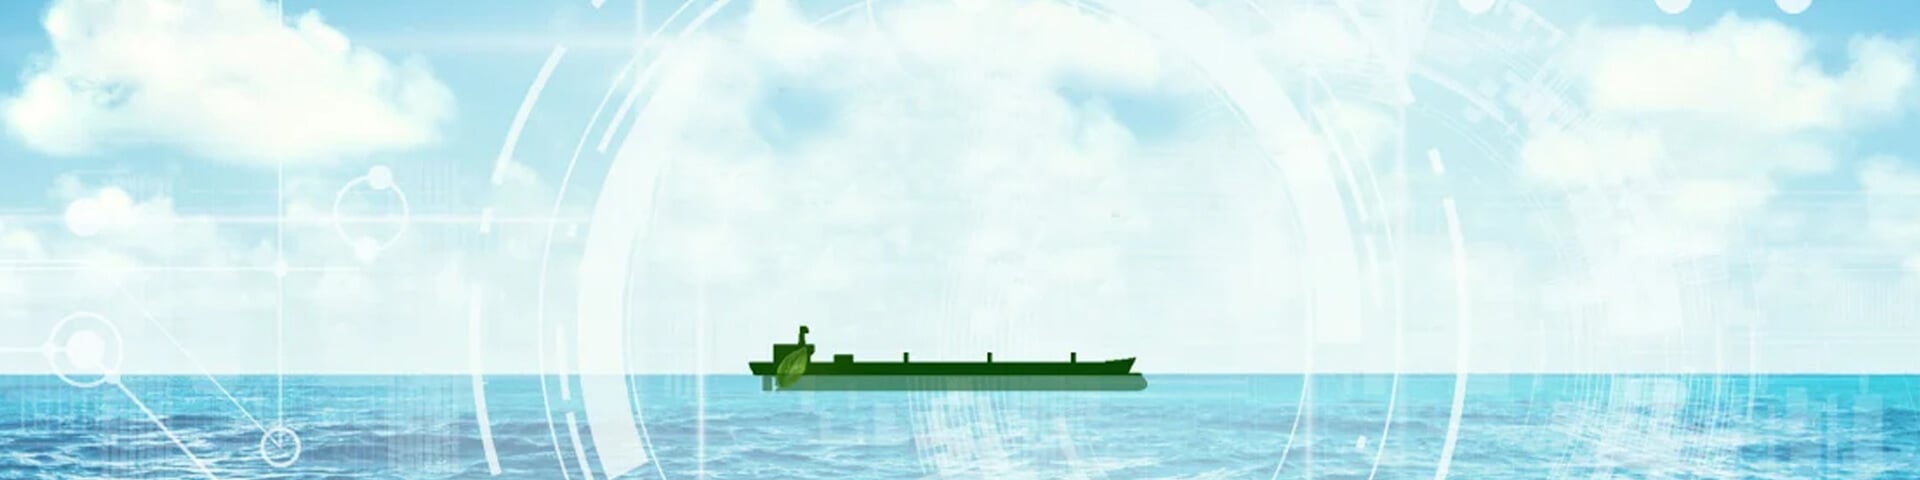 Together for sustainable shipping - 1920x480 clean 2